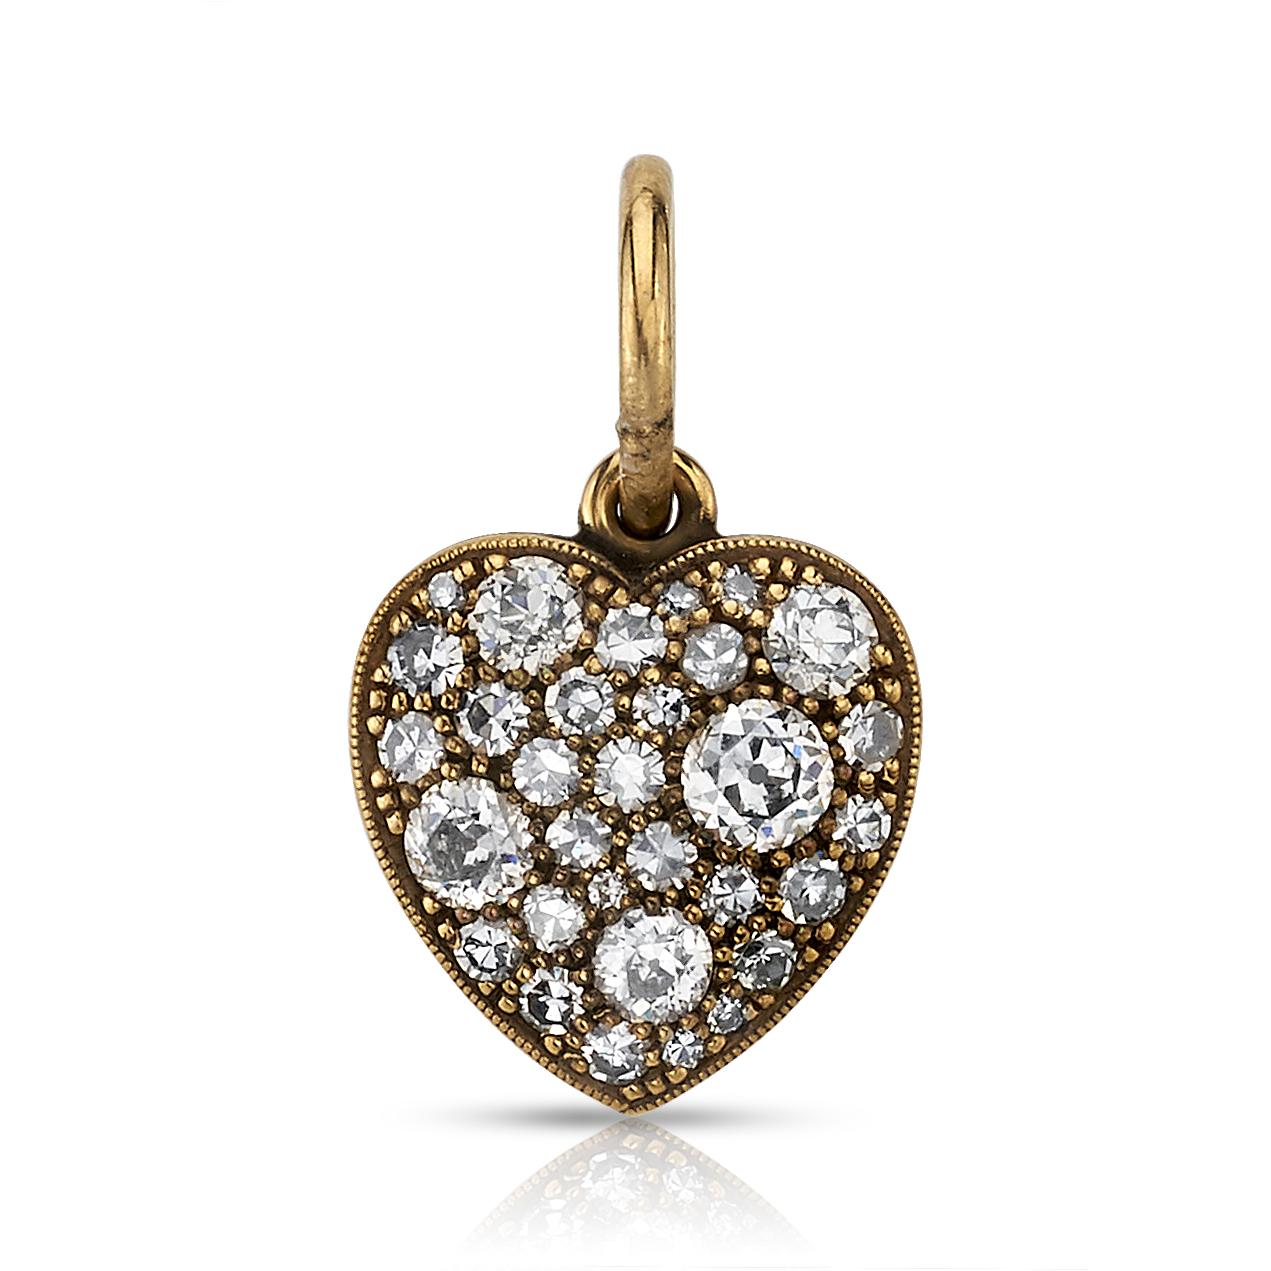 Approximately 0.80ctw varying old cut and round brilliant cut diamonds in a handcrafted 18k yellow gold heart pendant. Available in an oxidized or polished finish. Prices vary according to diamond weight. Price does not include chain.

*Cobblestone